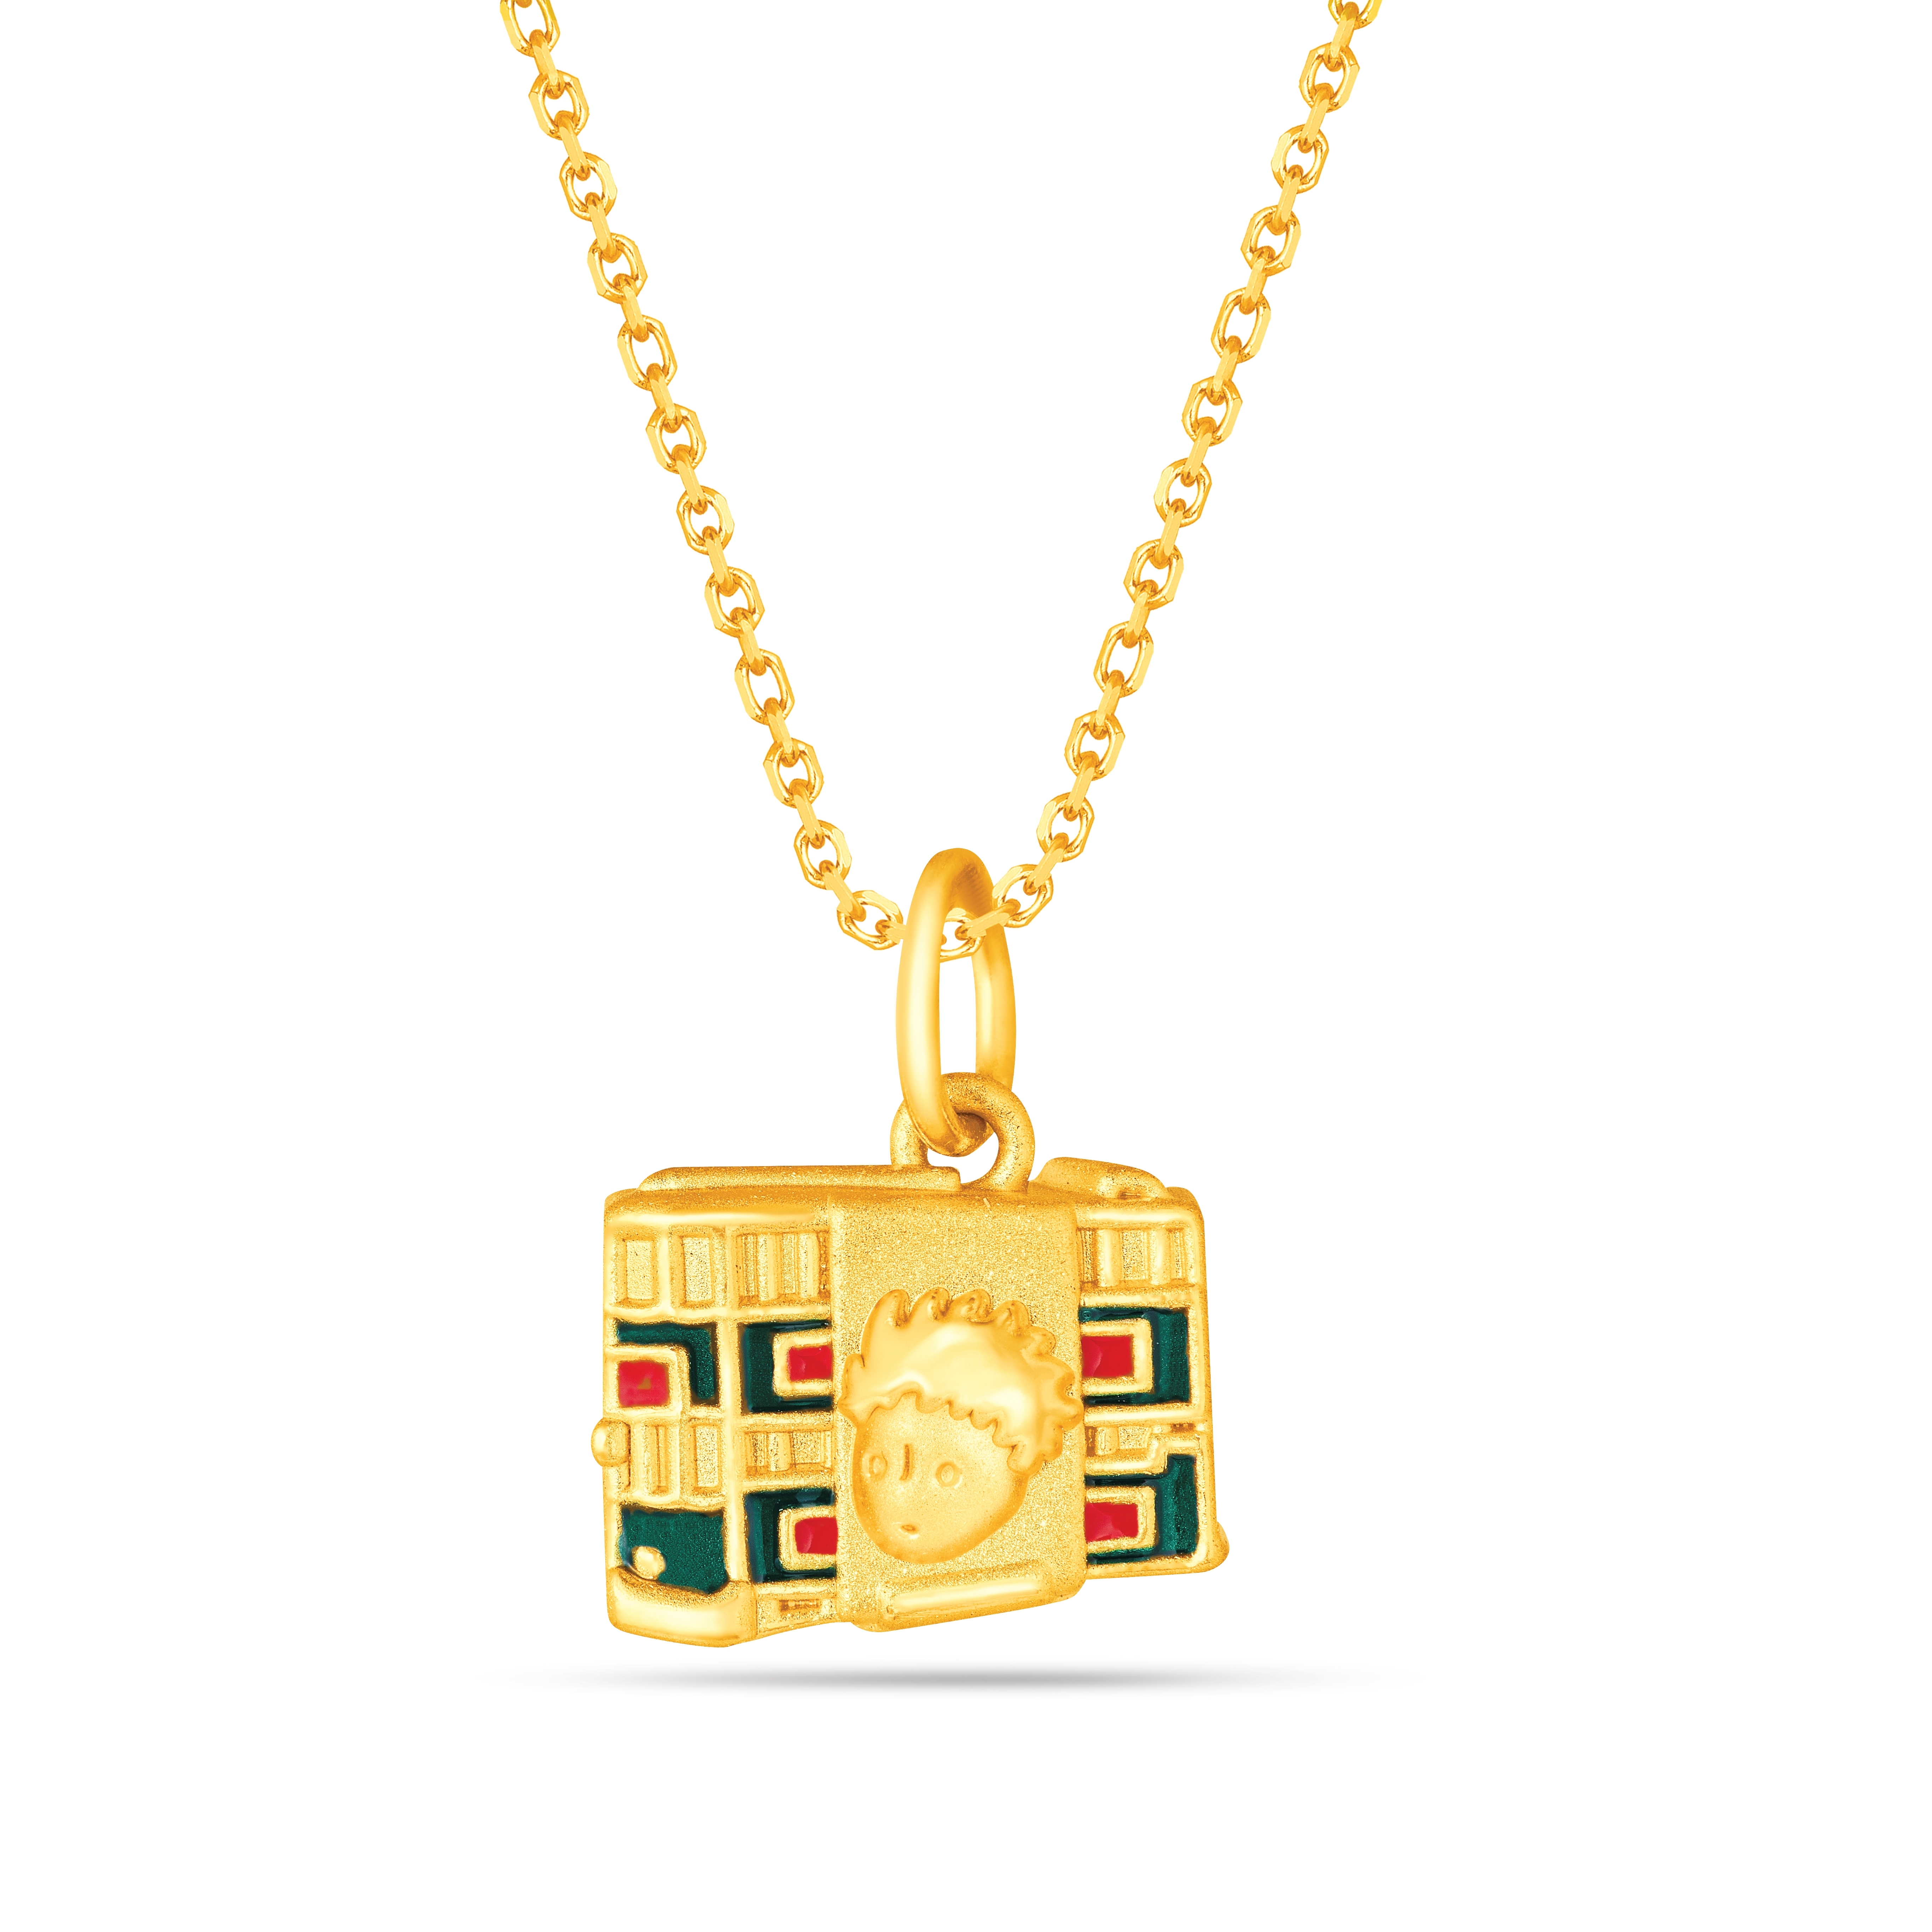 Don Mak Special Edition Fine Gold Charm with Enamel  - Tramcar